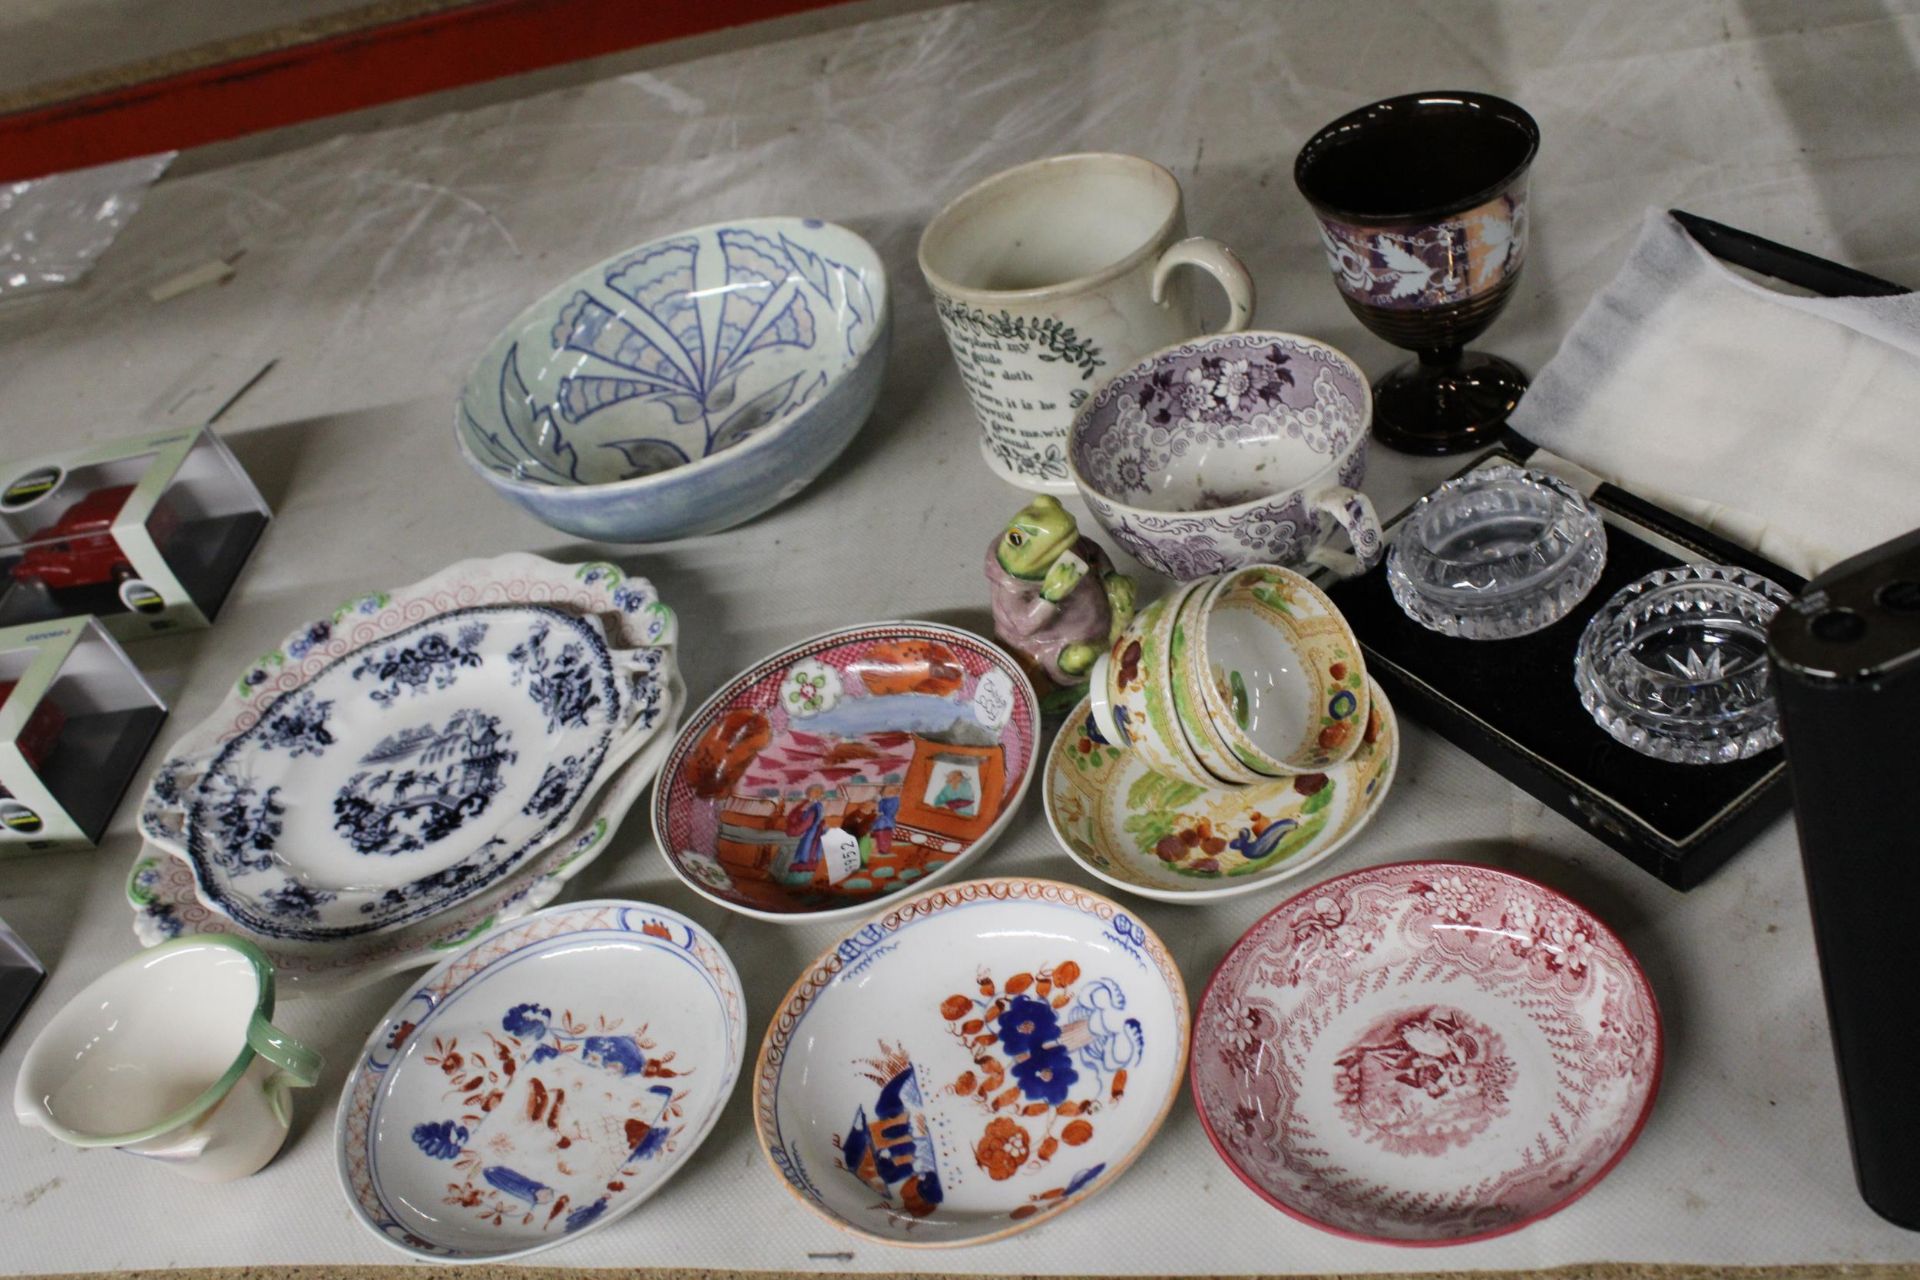 A MIXED LOT OF VINTAGE CERAMICS TO INCLUDE ORIENTAL DISHES, A FRANZ PORCELAIN CUP, CUPS, PLATES, ETC